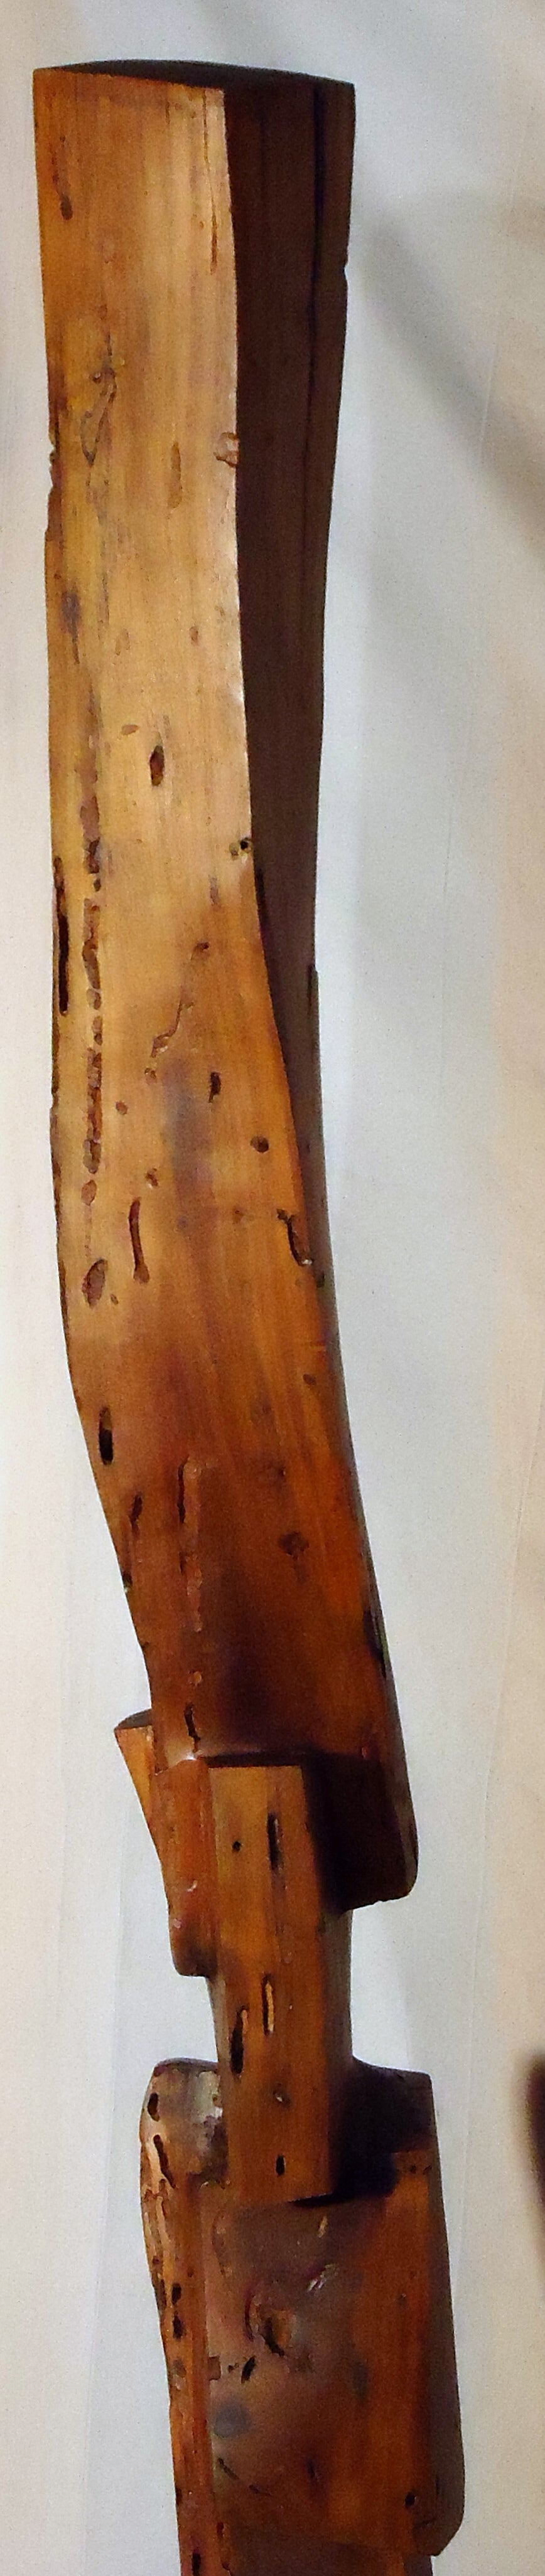 Hand-Carved Studio Mesquite Stele in the Style of J. B. Blunk, circa 1970 For Sale 1